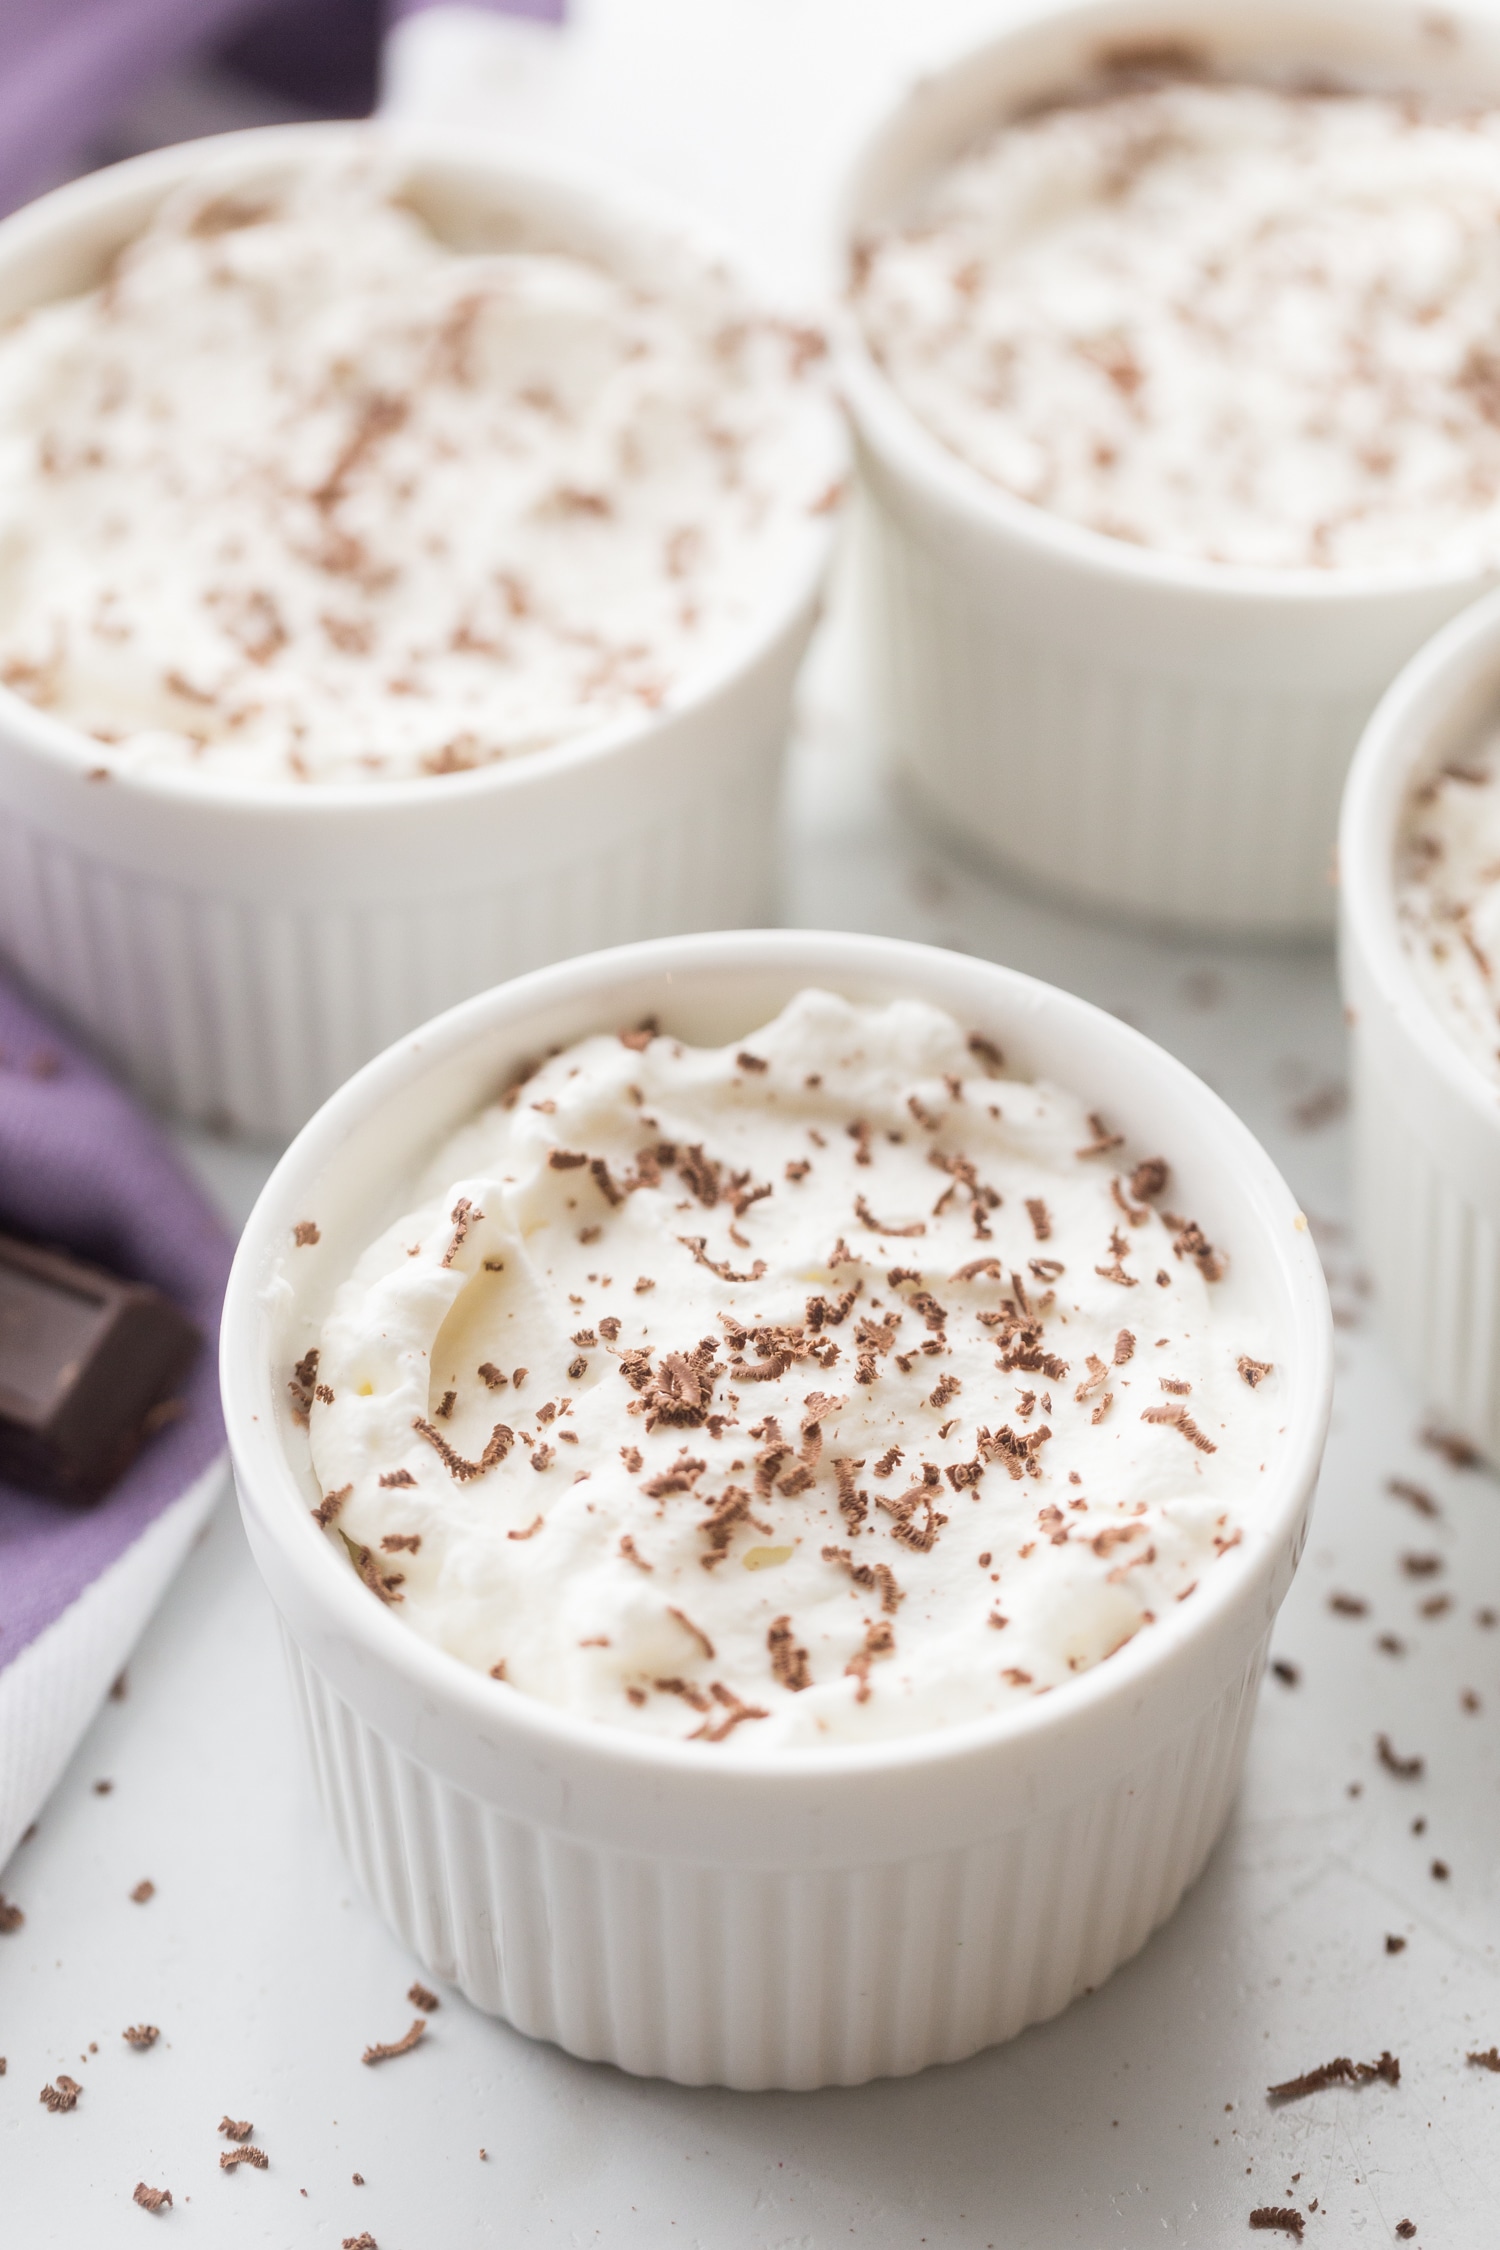 Mousse in ramekins with homemade whipped cream and chocolate shaving sprinkled over the top.